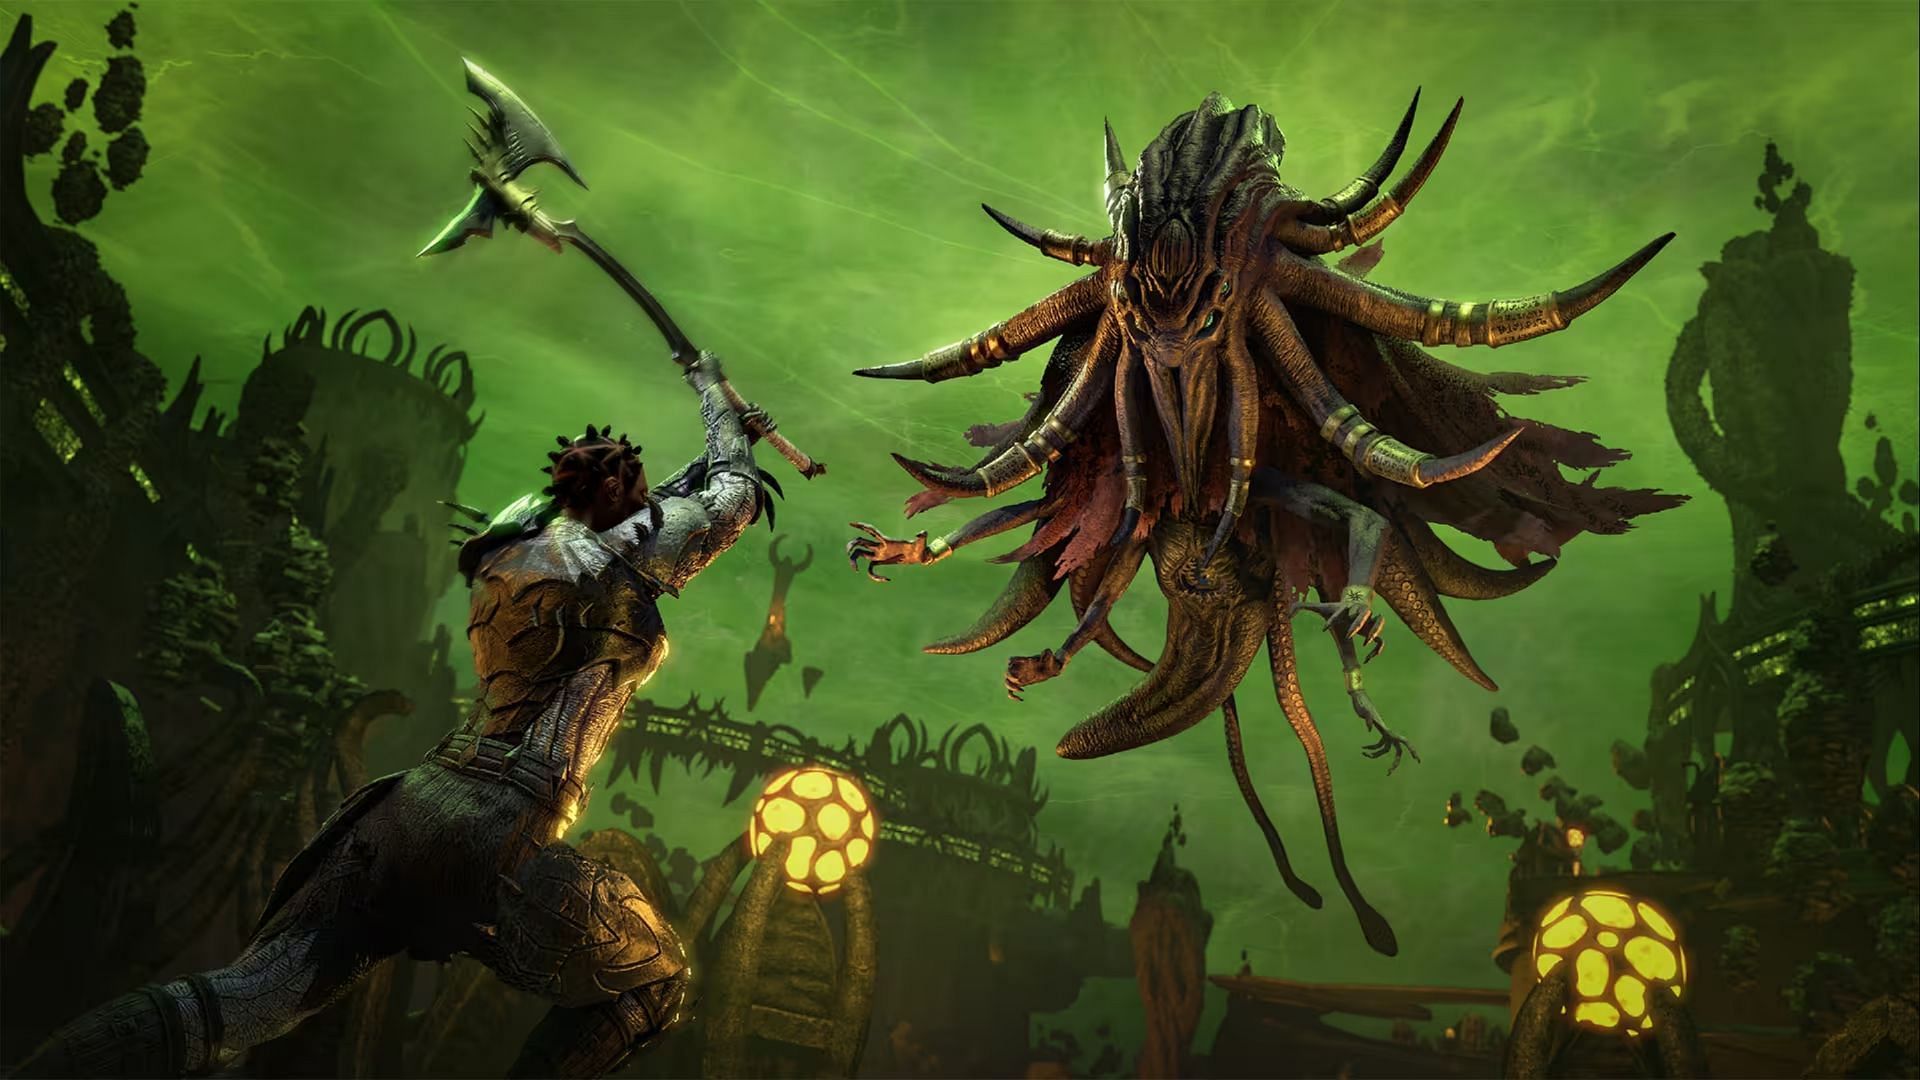 Elder Scrolls Online: Necrom promises to be incredibly fun.